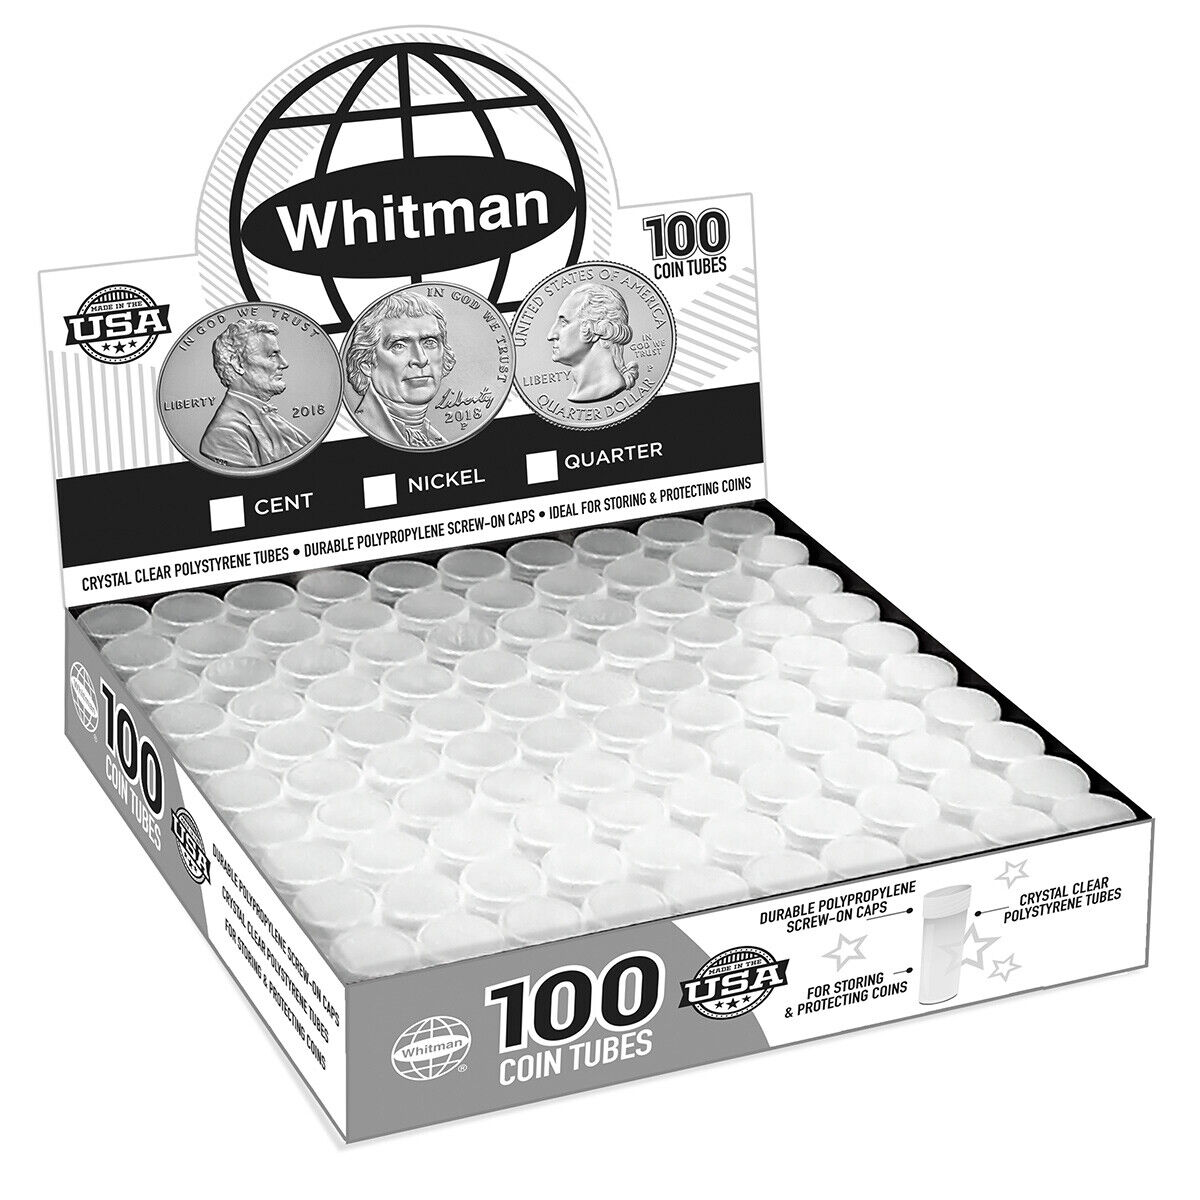 Quarter (25 Cent) Size Coin Tubes (100 Count) - Official Whitman